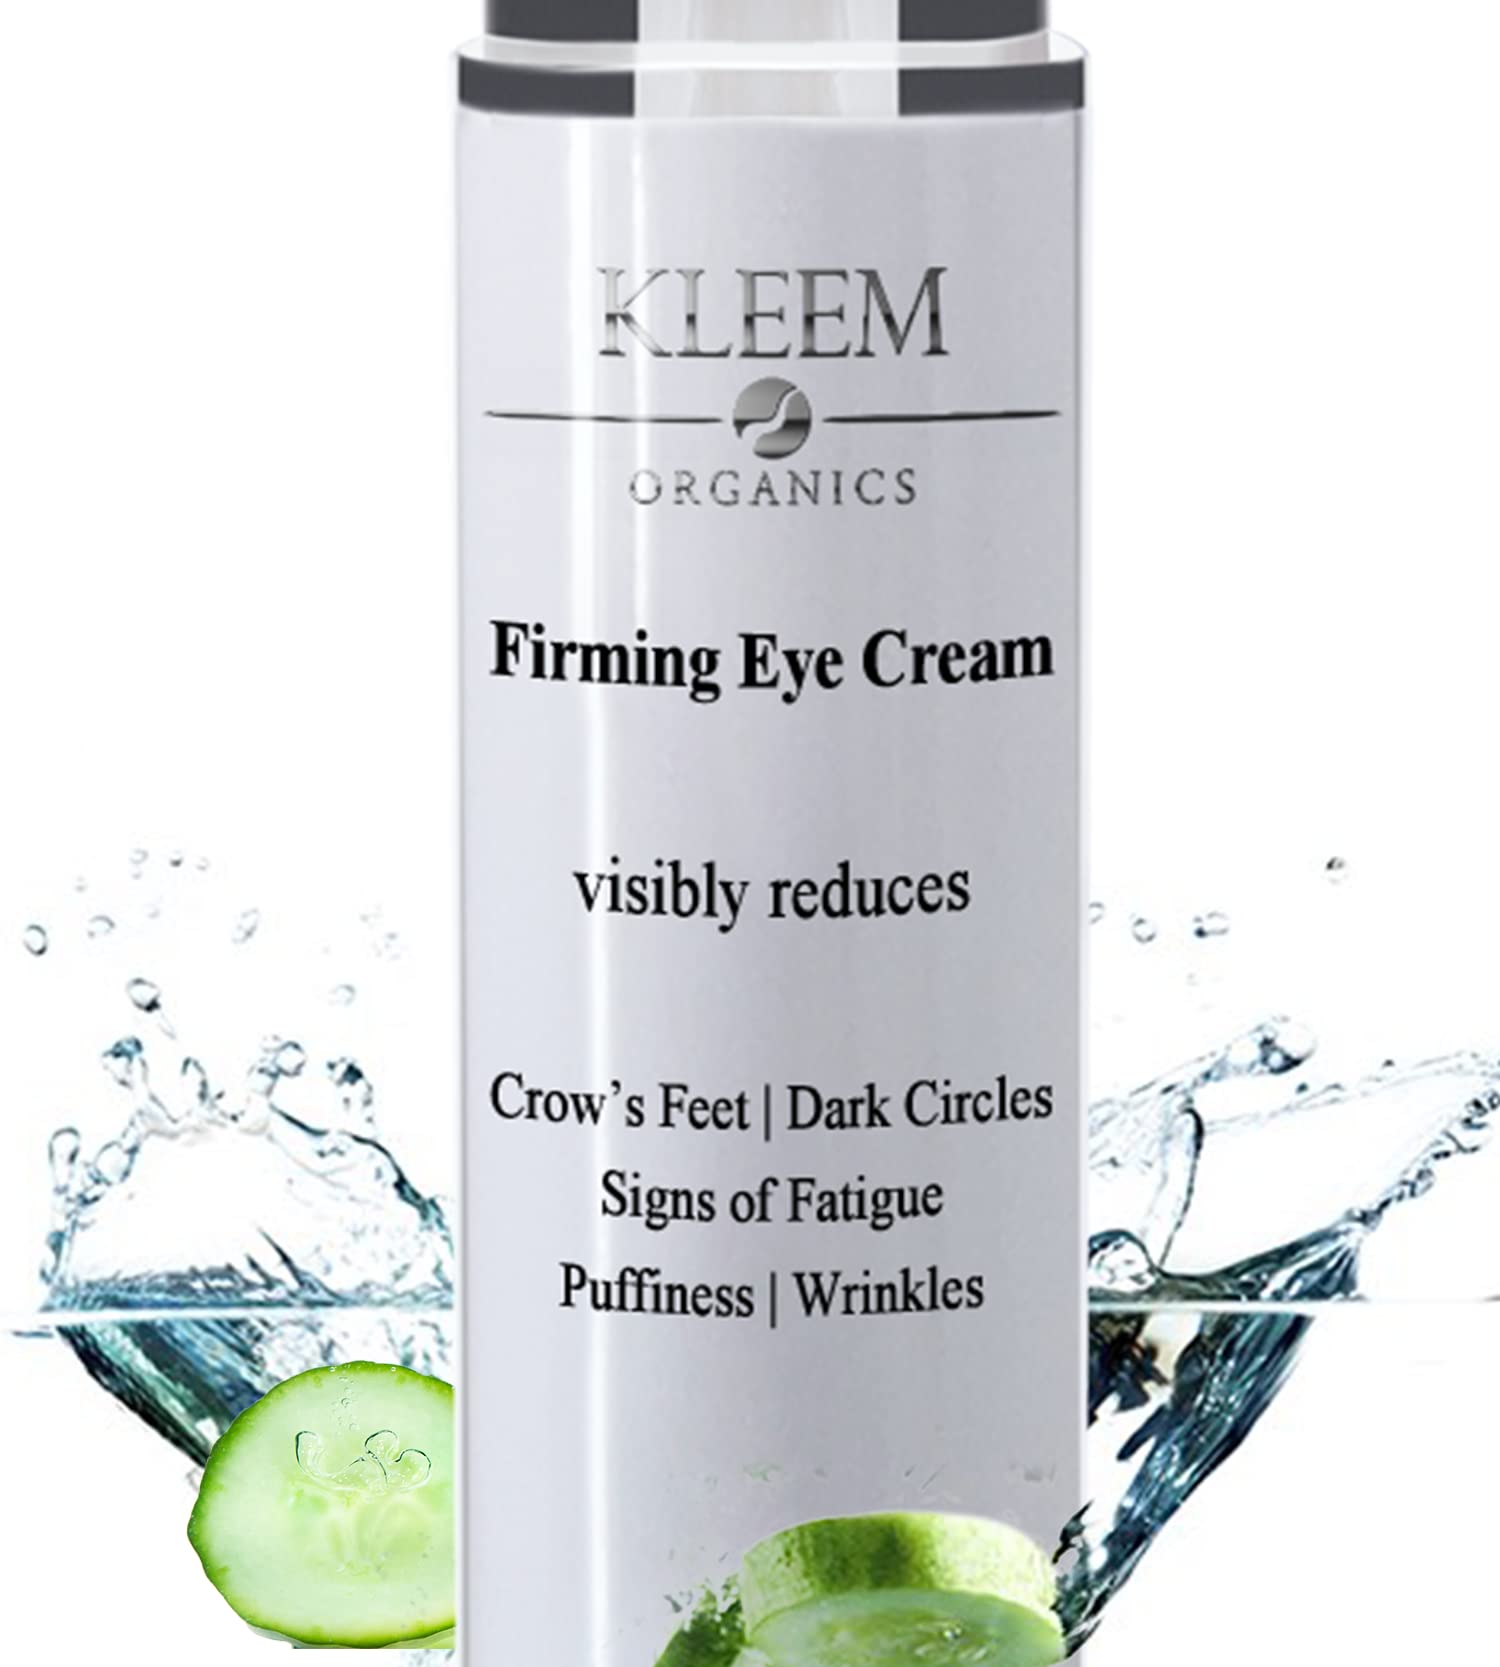 Kleem Organics Anti Aging Eye Cream for Dark Circles and Puffiness that Reduces Eye Bags, Crow's Feet, Fine Lines & Sagginess - Natural Hydrating Under Eye Cream for Wrinkles with Caffeine -0.51 fl oz